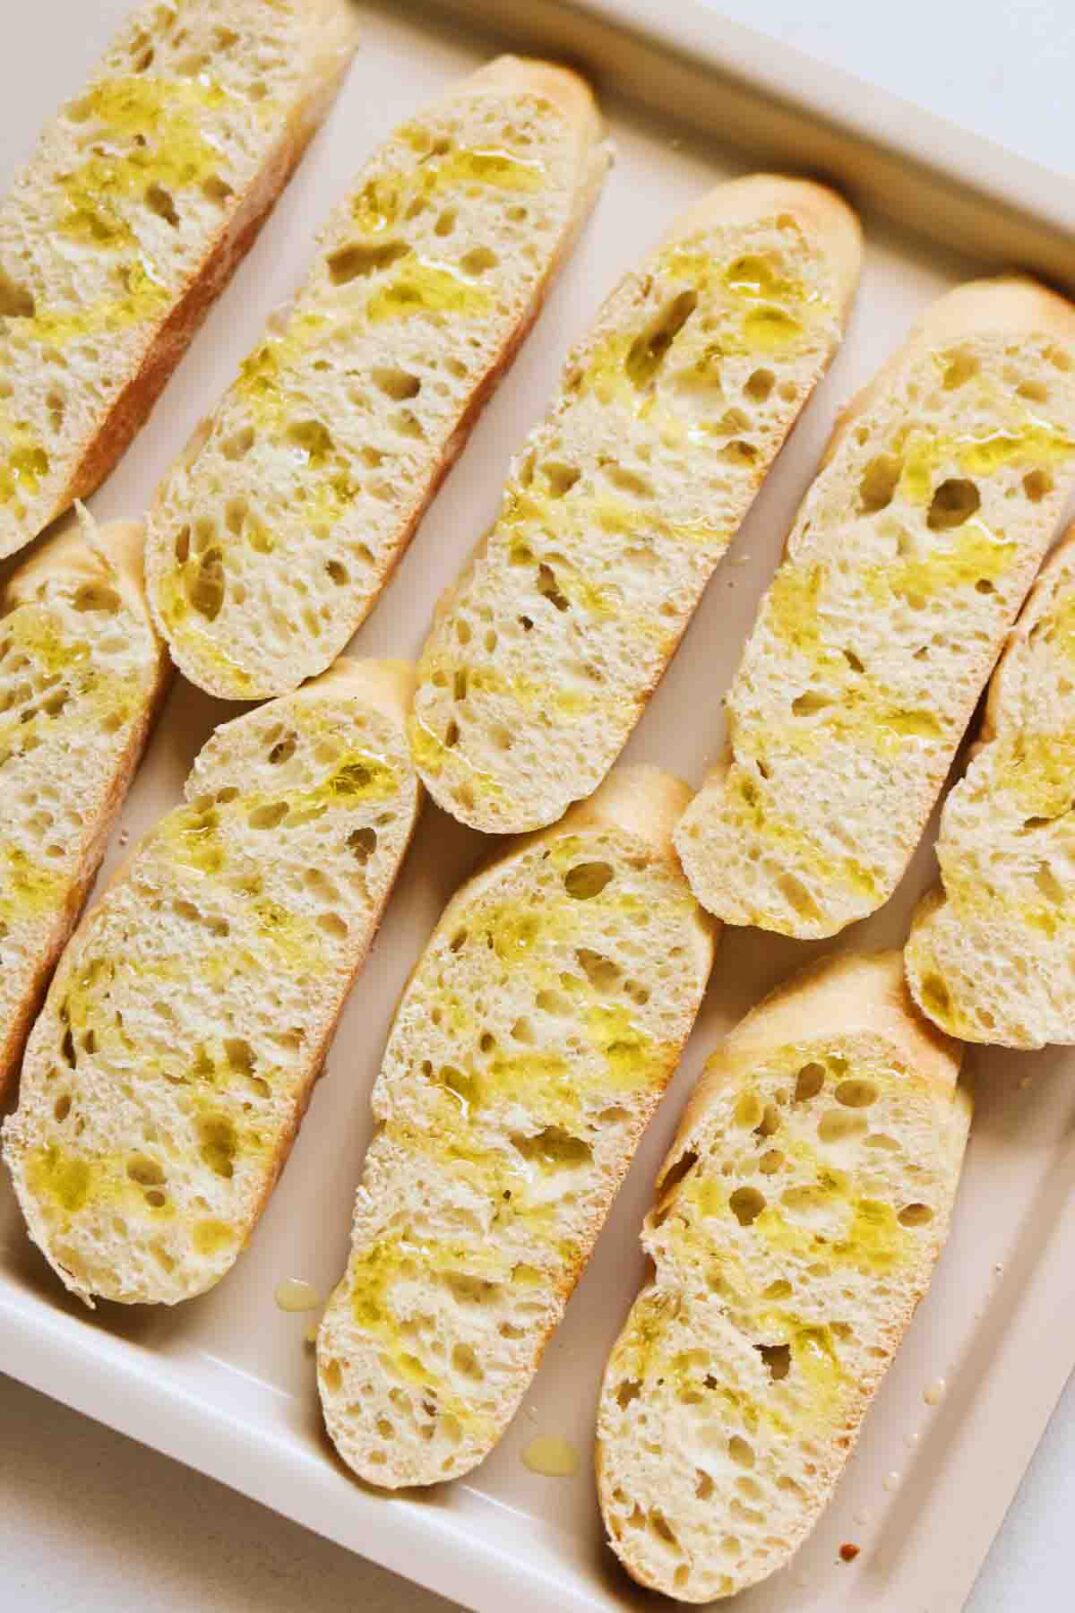 baguette rounds on a baking sheet drizzled with yellow olive oil.